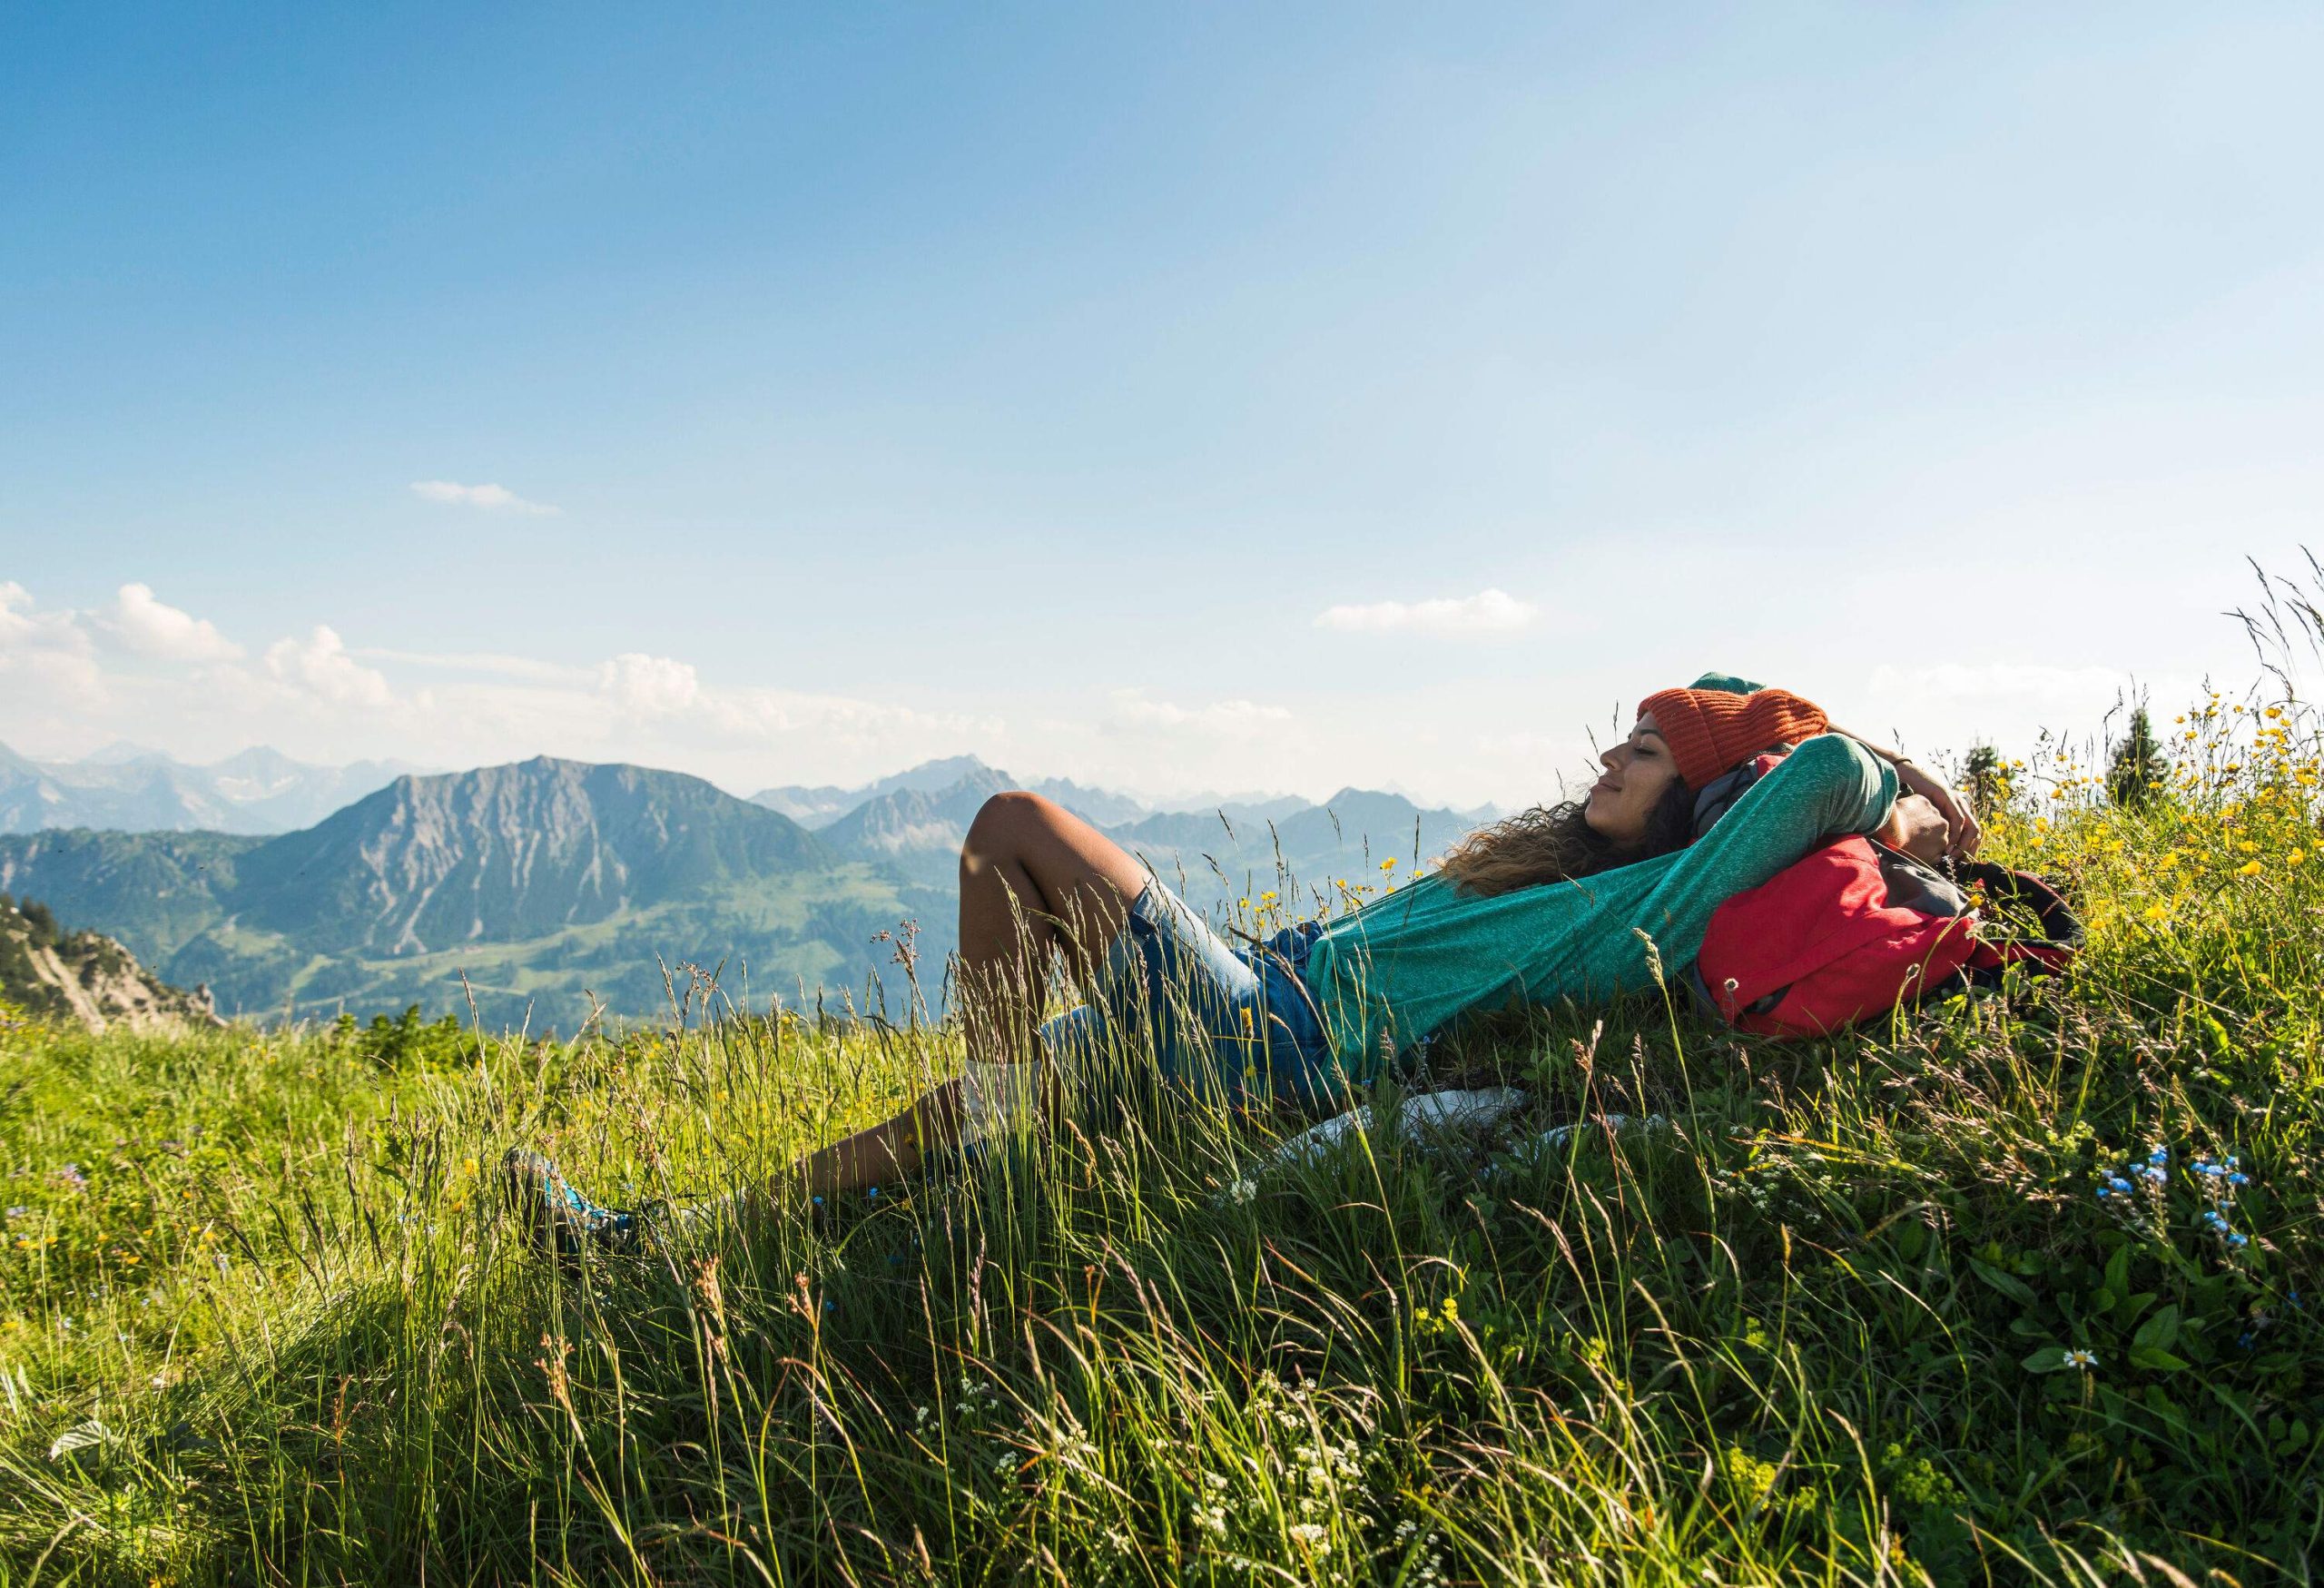 A woman lies on the grassy summit overlooking the mountain range against the cloudy blue sky.